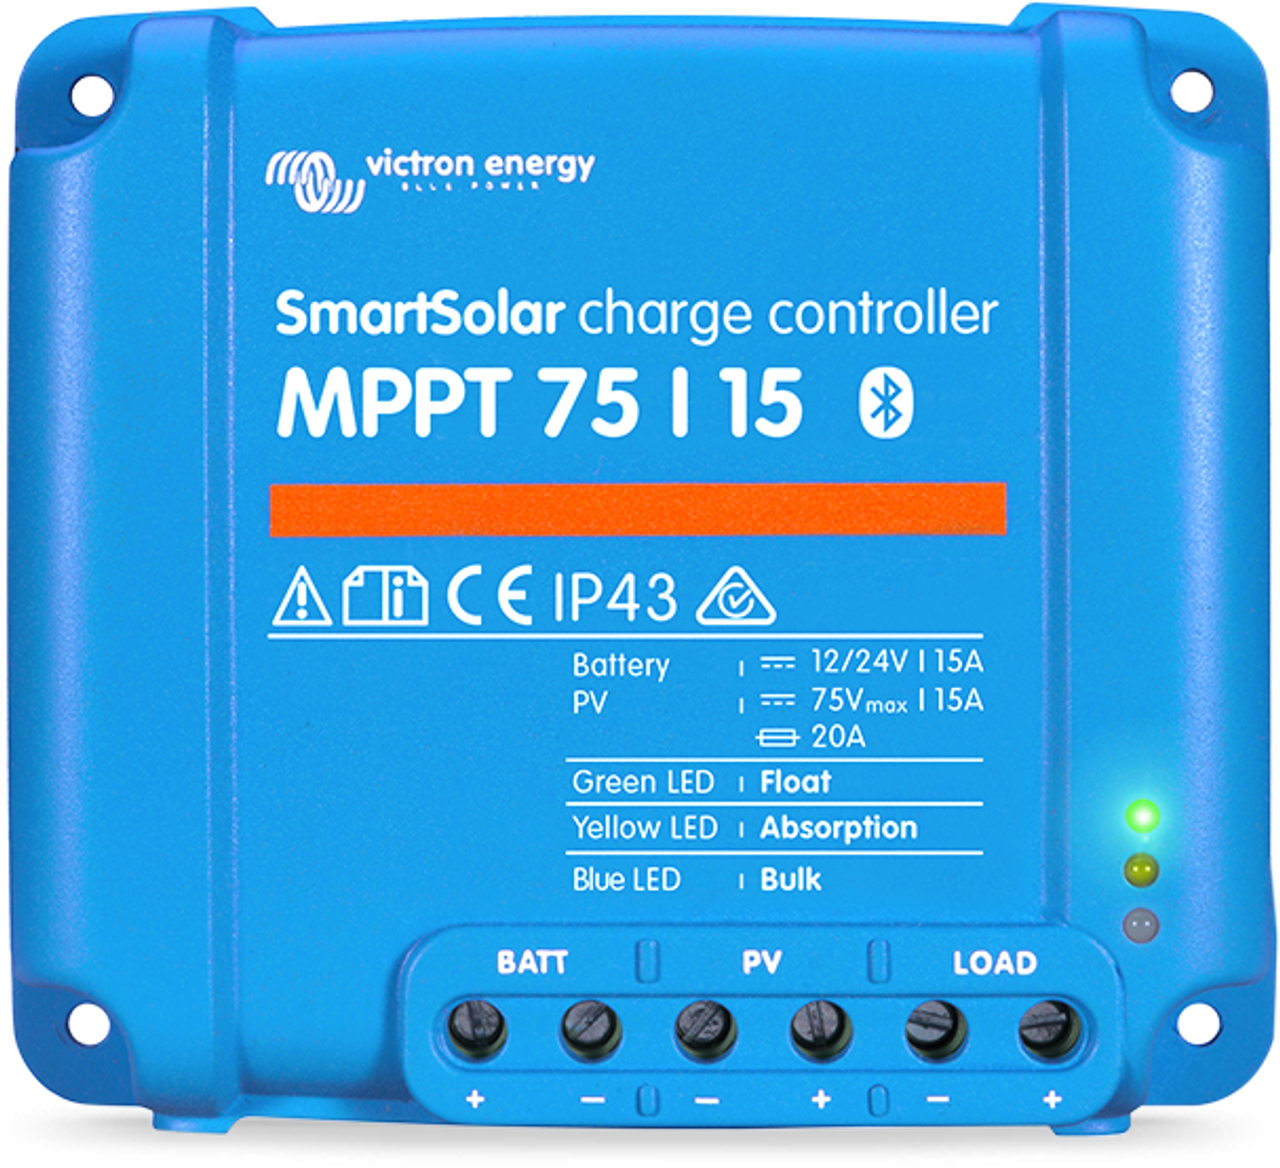 https://cdn11.bigcommerce.com/s-z25w13u/images/stencil/1280x1280/products/1272/1992/victron-energy-smartsolar-75-15-mppt-charge-controller__59698.1596772967.png?c=2